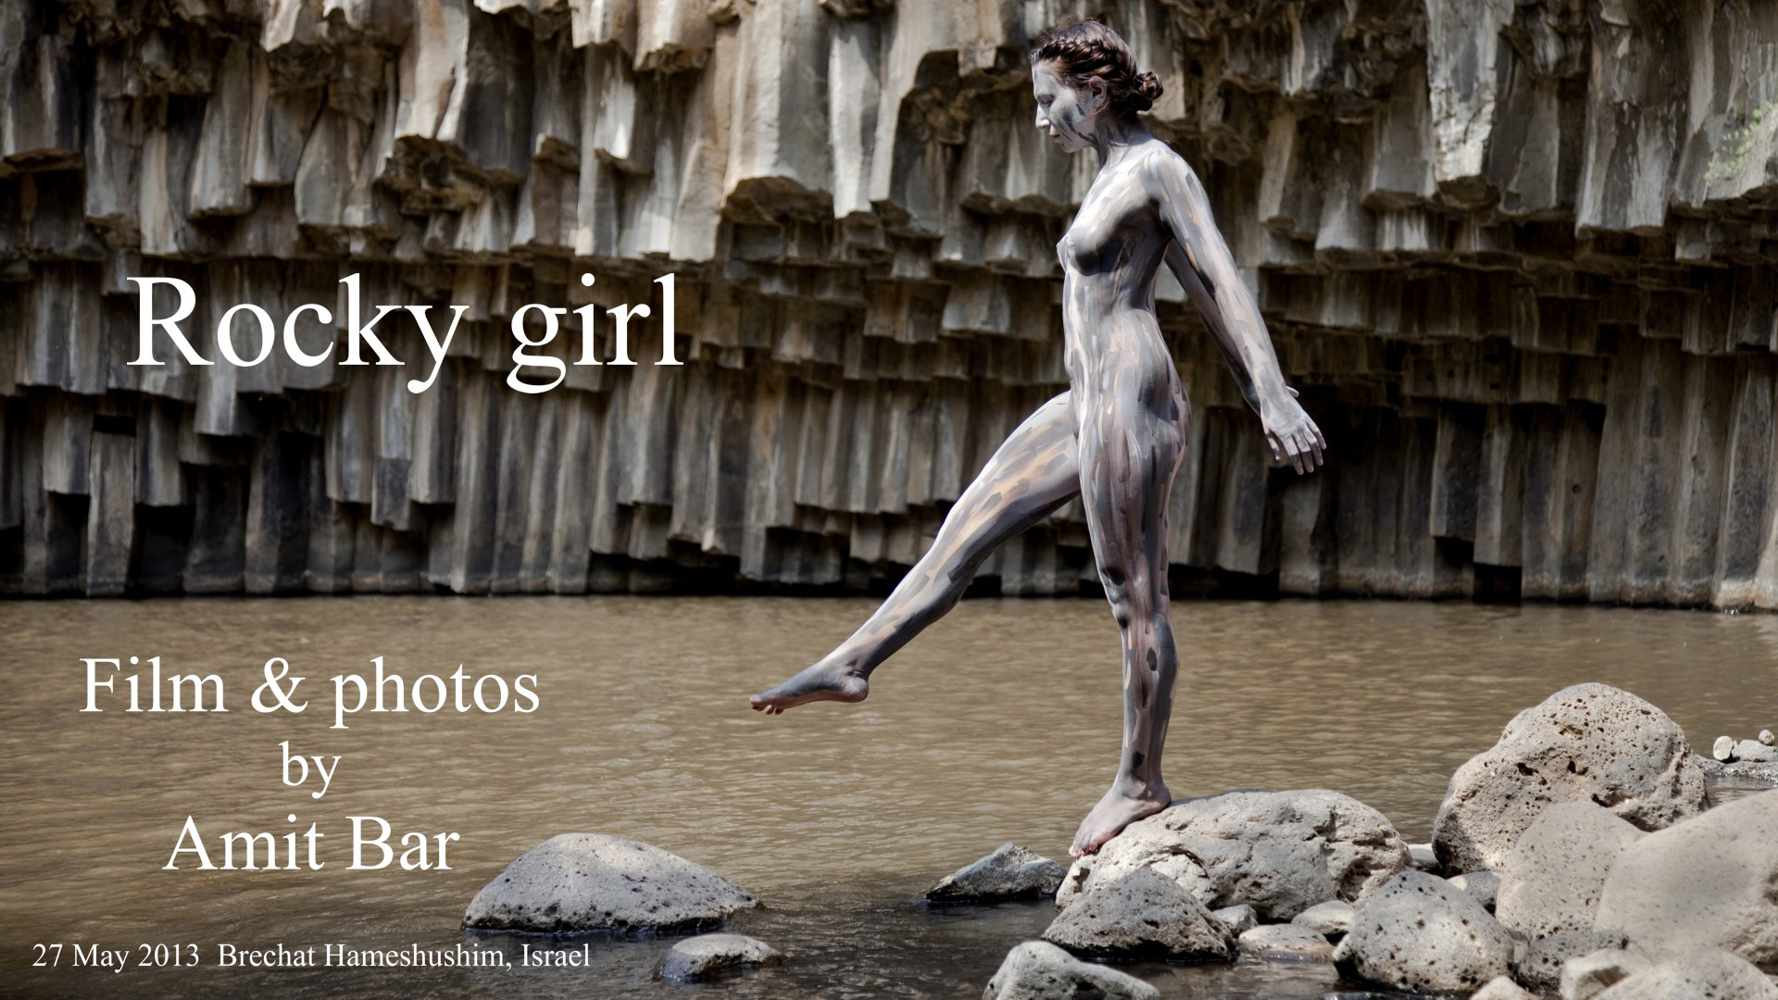 Rocky girl video: A body-painting film, dedicated to the beauty of two marvelous things: Nature and woman's body.
Executed at Brechat Hameshushim, which is basalt hexagonal pool in the central Golan Heights, Israel